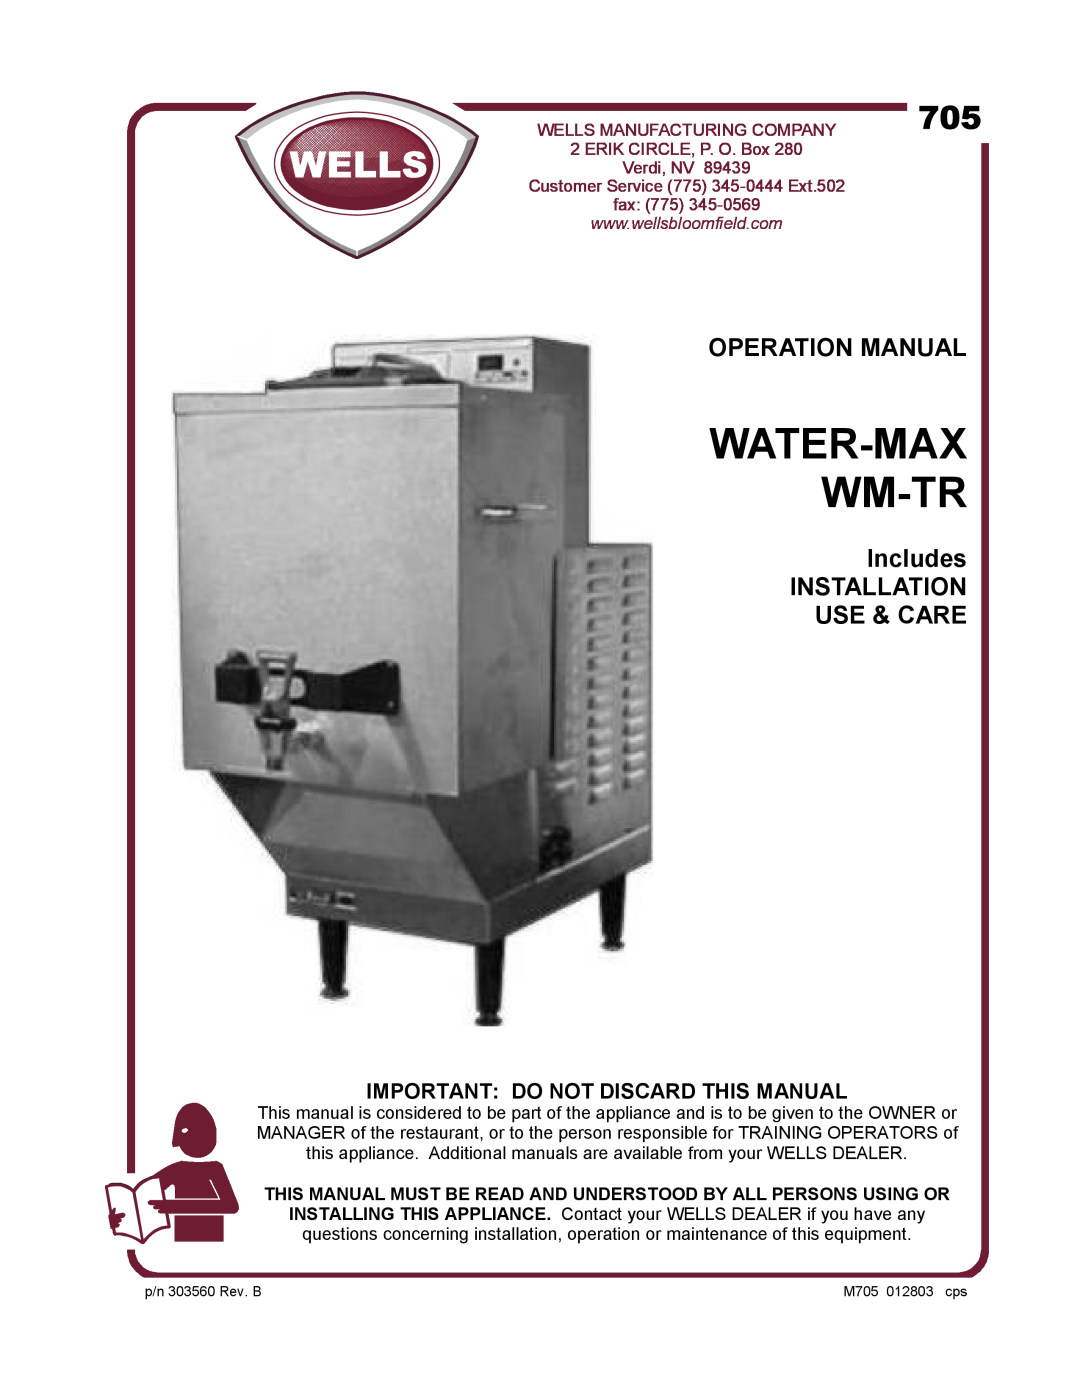 Wells WM-TR operation manual Includes INSTALLATION USE & CARE, Important Do Not Discard This Manual, Water-Max Wm-Tr, fax 